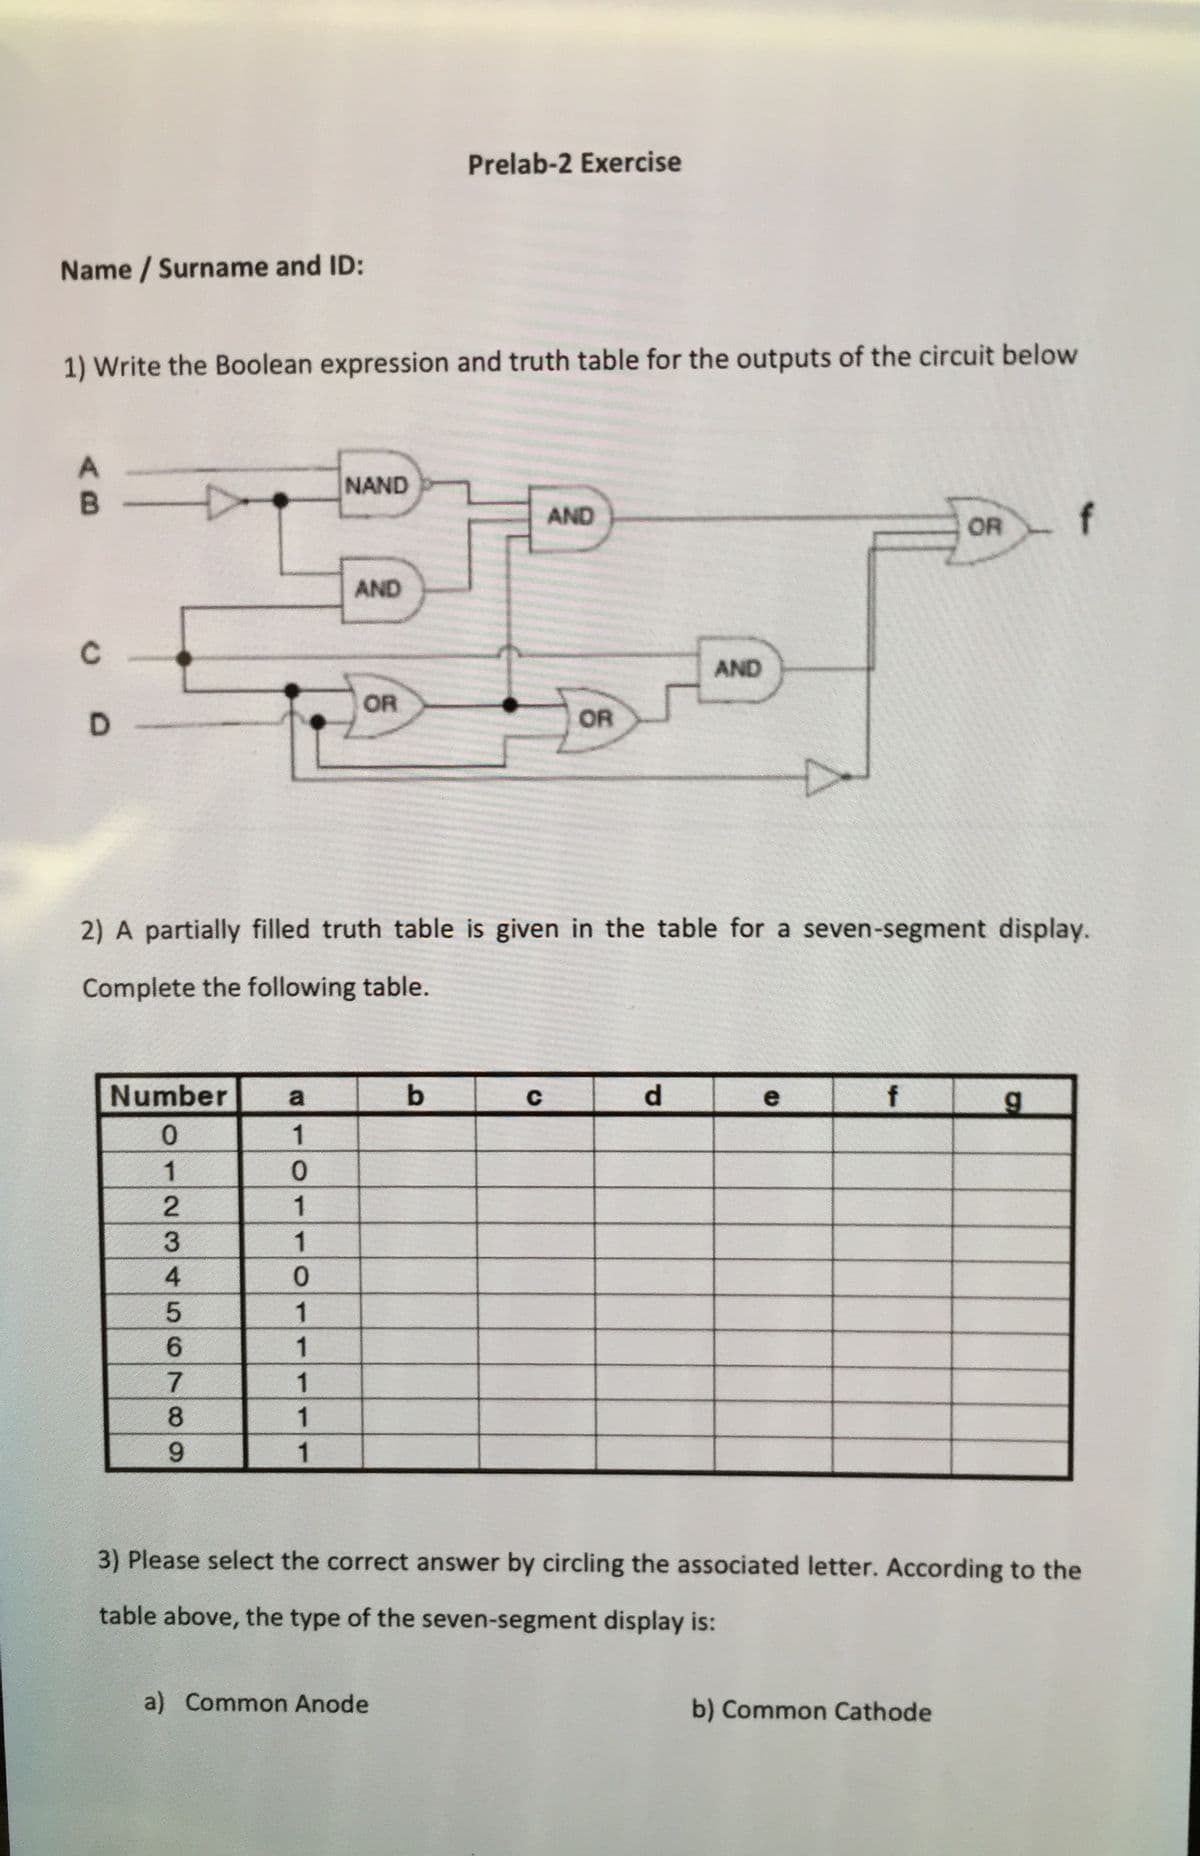 Prelab-2 Exercise
Name / Surname and ID:
1) Write the Boolean expression and truth table for the outputs of the circuit below
A
NAND
AND
OR
AND
AND
OR
D.
OR
2) A partially filled truth table is given in the table for a seven-segment display.
Complete the following table.
Number
a
b
d.
f
1
1
4
1
1
1
1
3) Please select the correct answer by circling the associated letter. According to the
table above, the type of the seven-segment display is:
a) Common Anode
b) Common Cathode
23
5678O9
